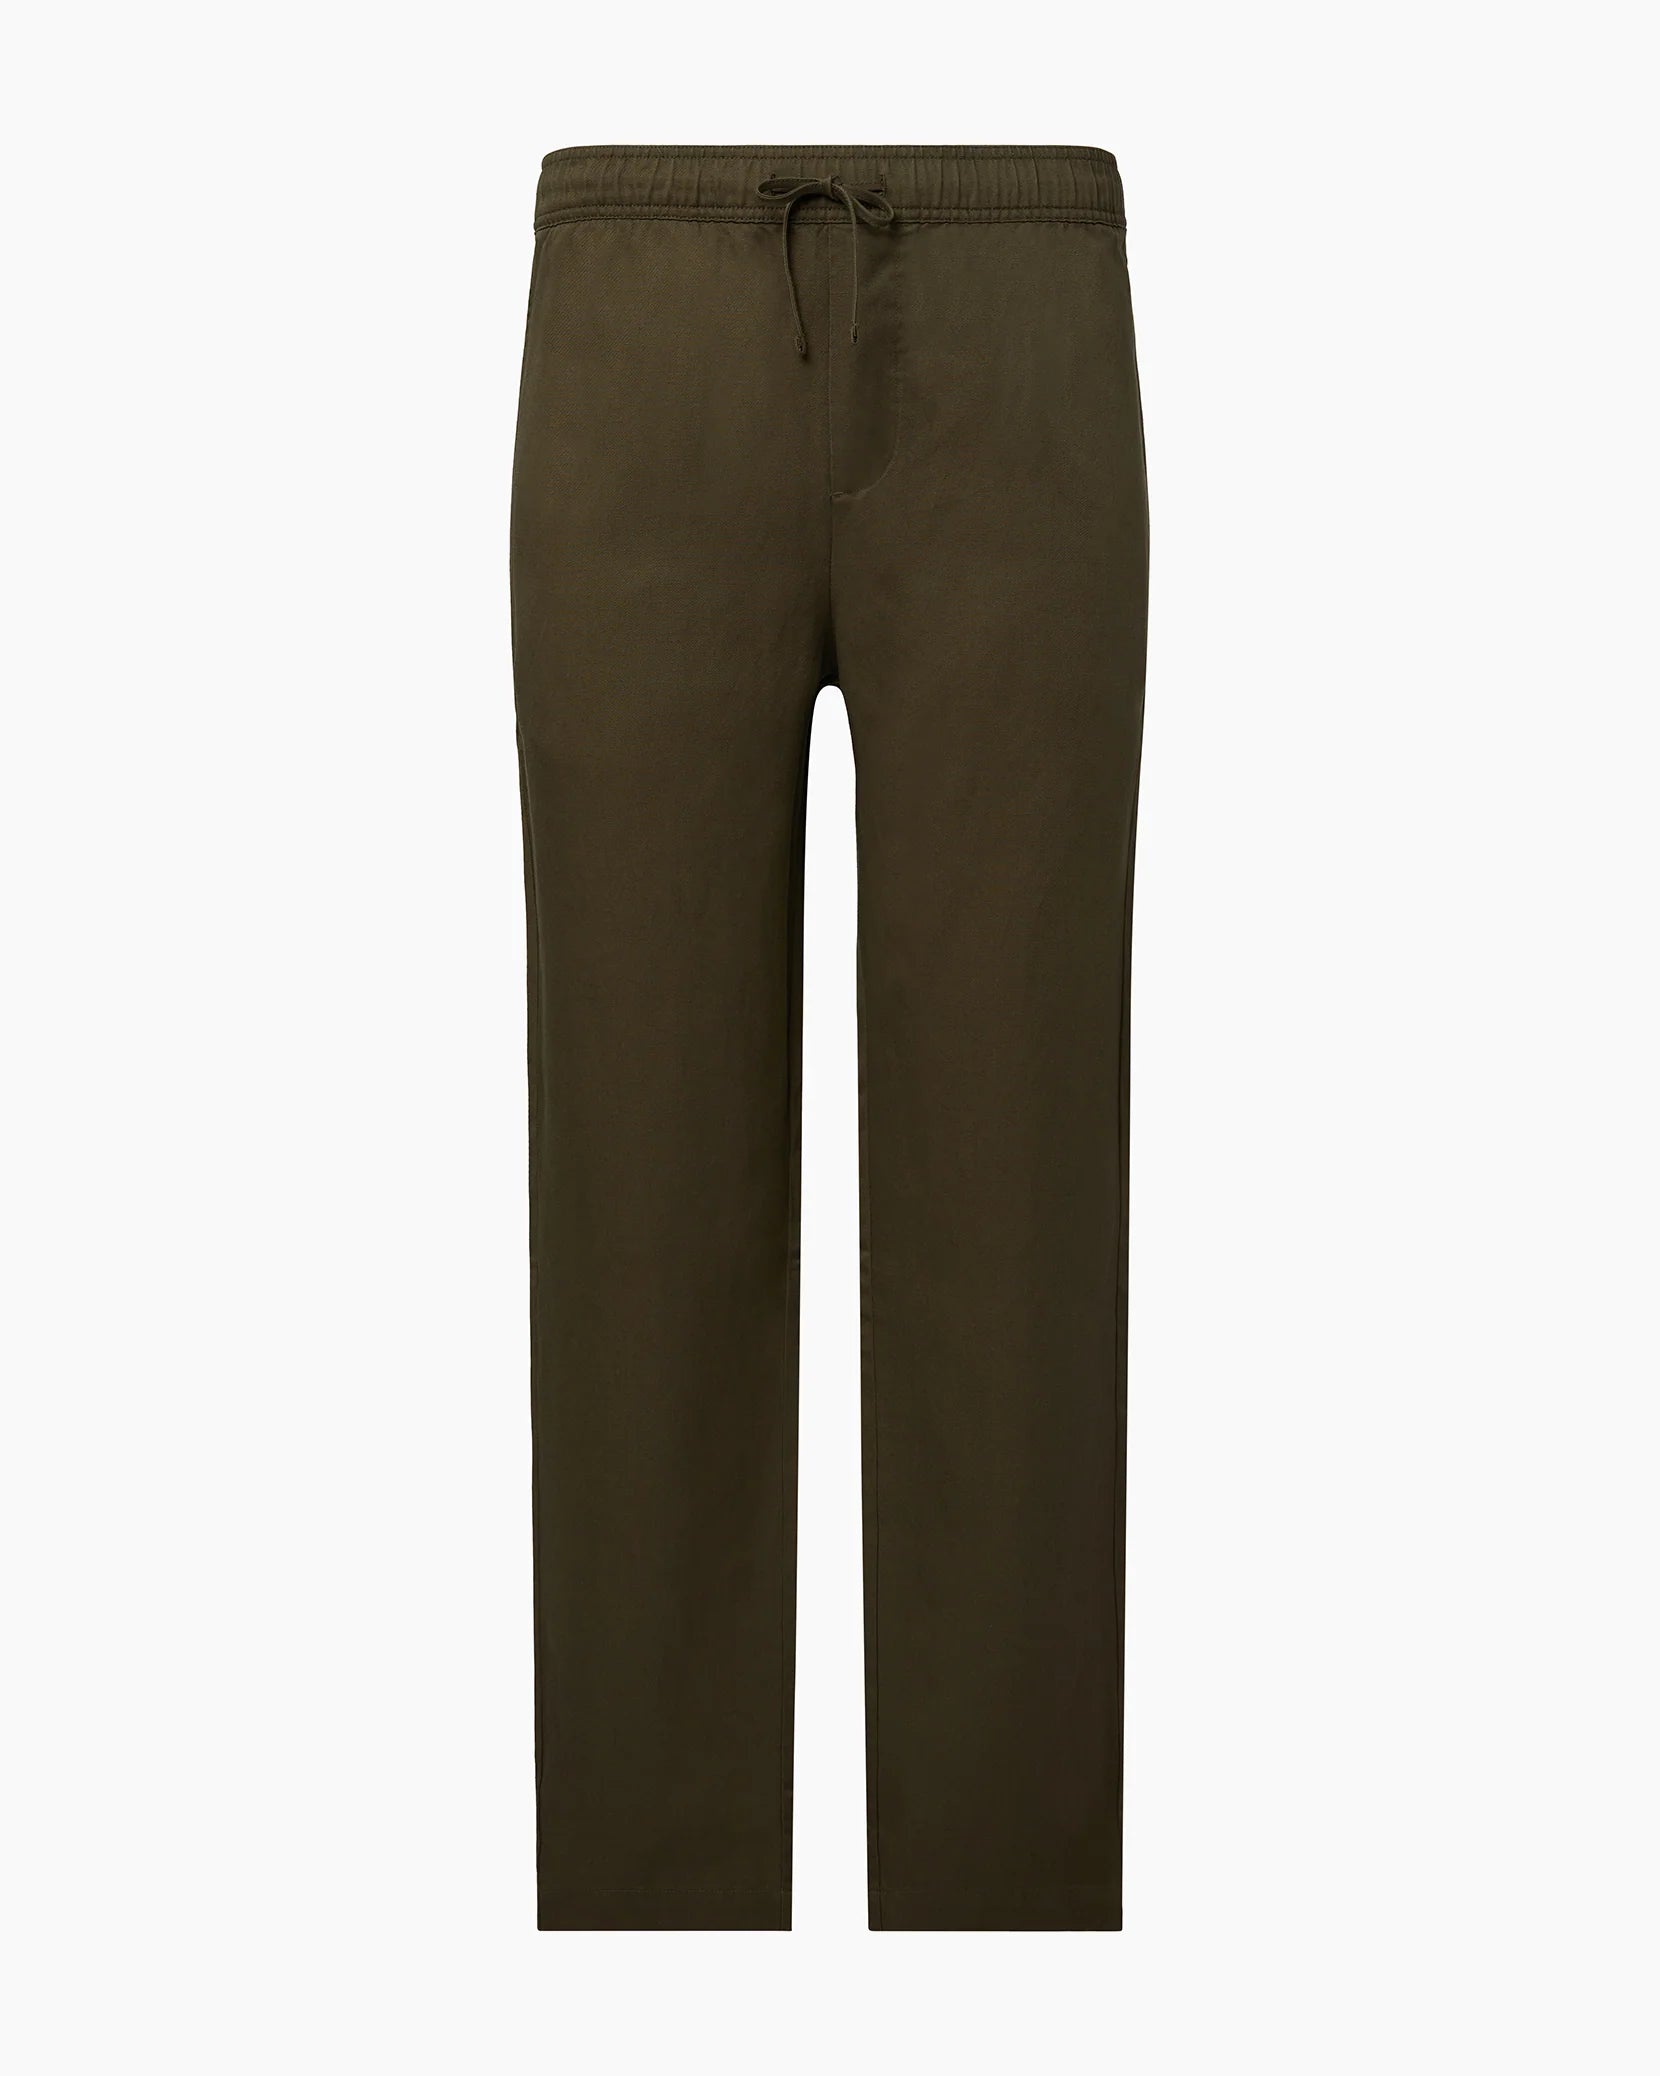 Garment Dyed Twill Pull-On Pant